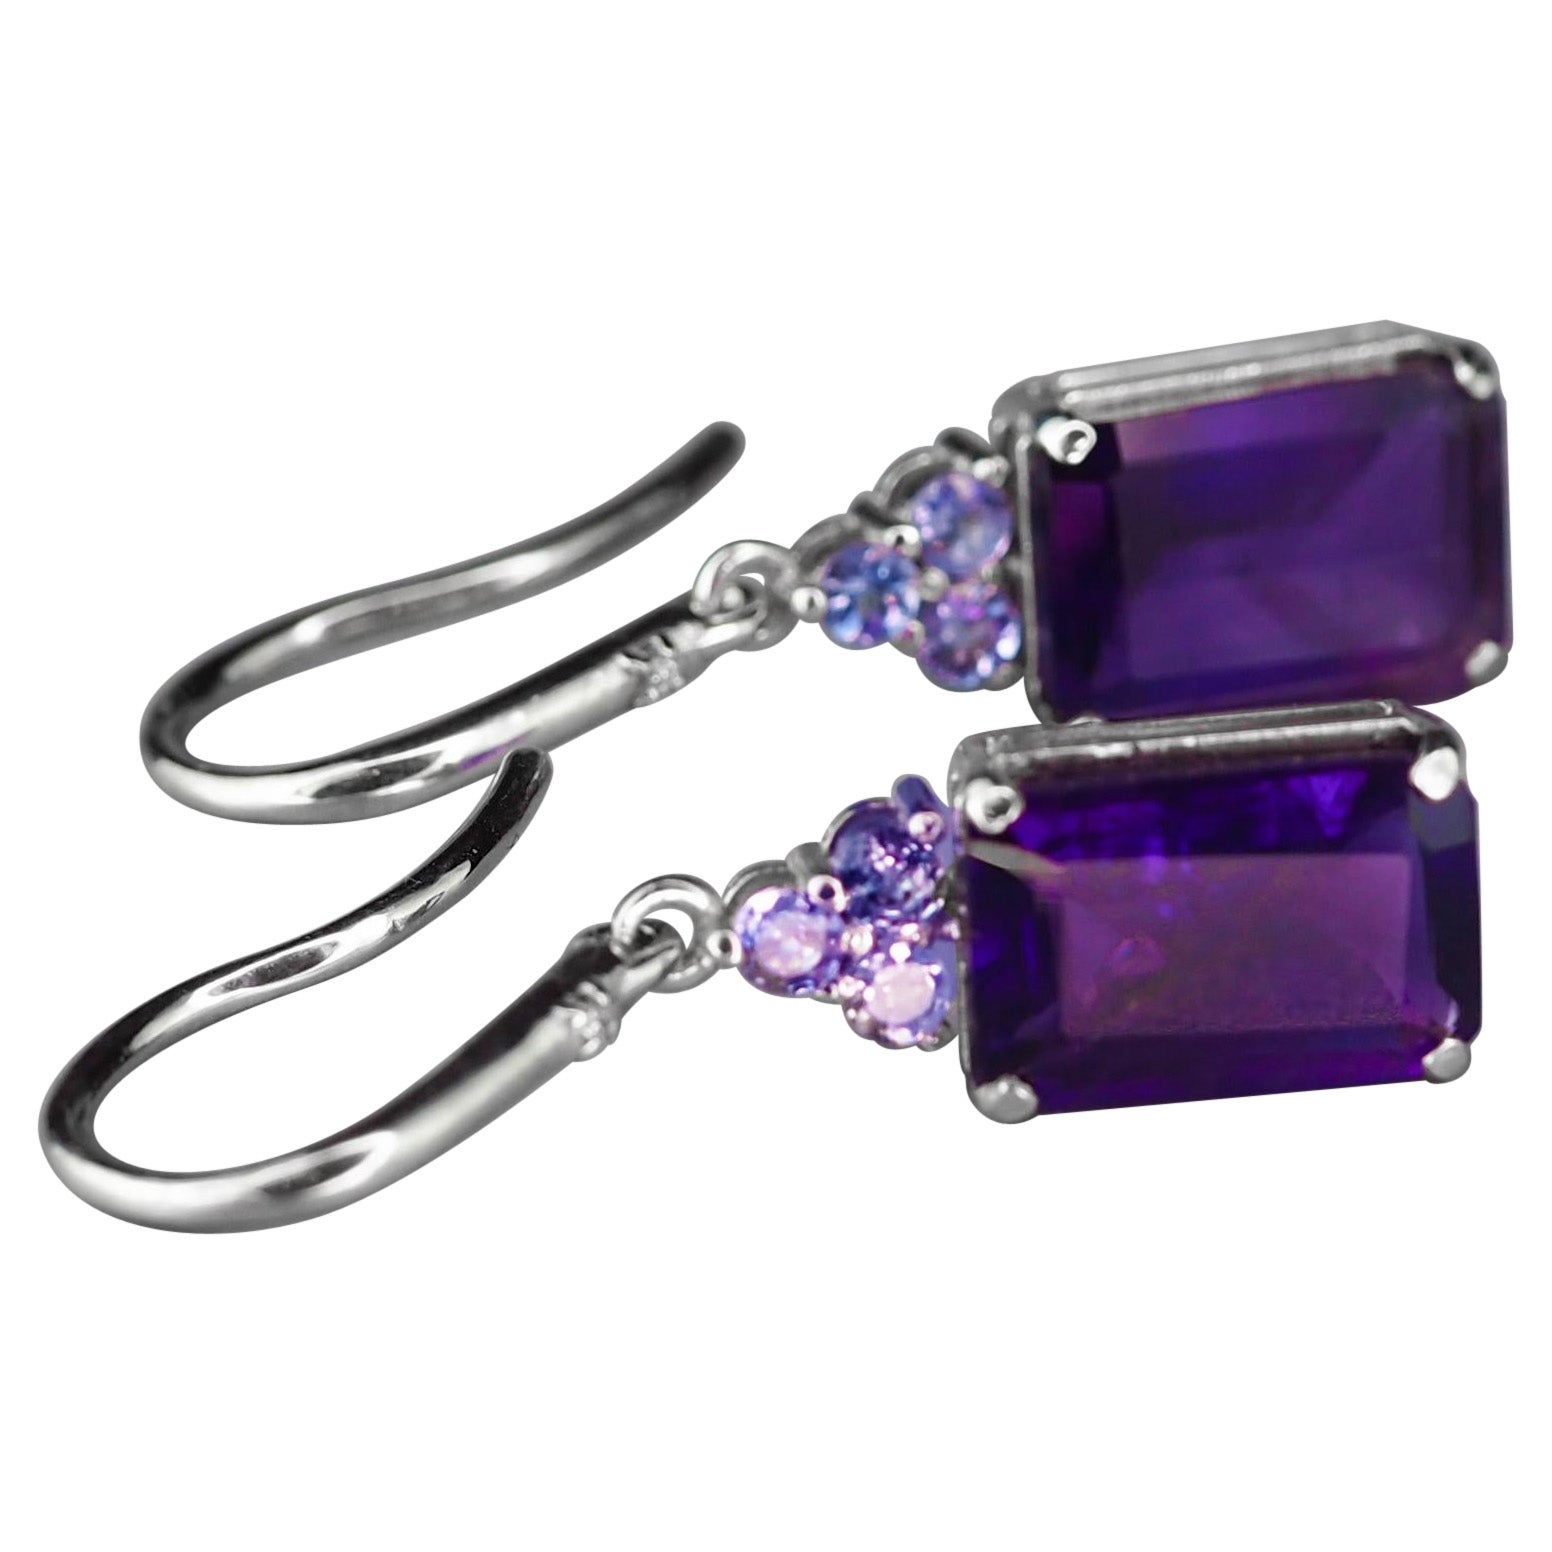 14 Kt White Gold Earrings with Amethysts, Tanzanites and Diamonds